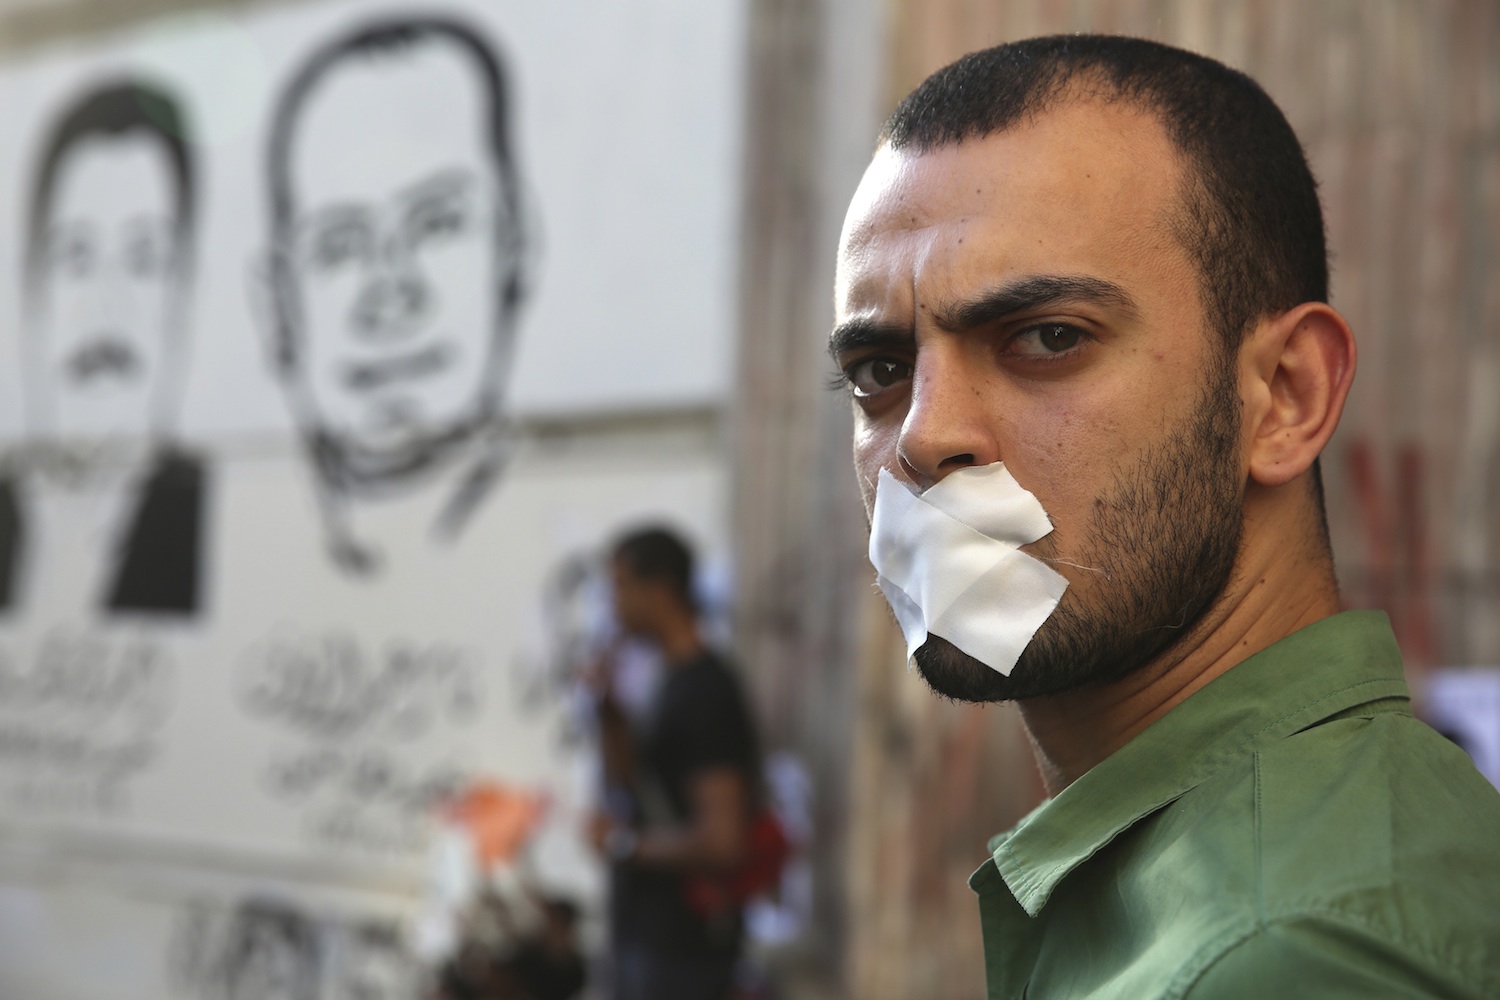 A protester rallies in support of journalists who were detained by Egyptian authorities, in front of the Press Syndicate in Cairo. June 1, 2014. (Photo: Reuters/Mohamed Abd El Ghany)